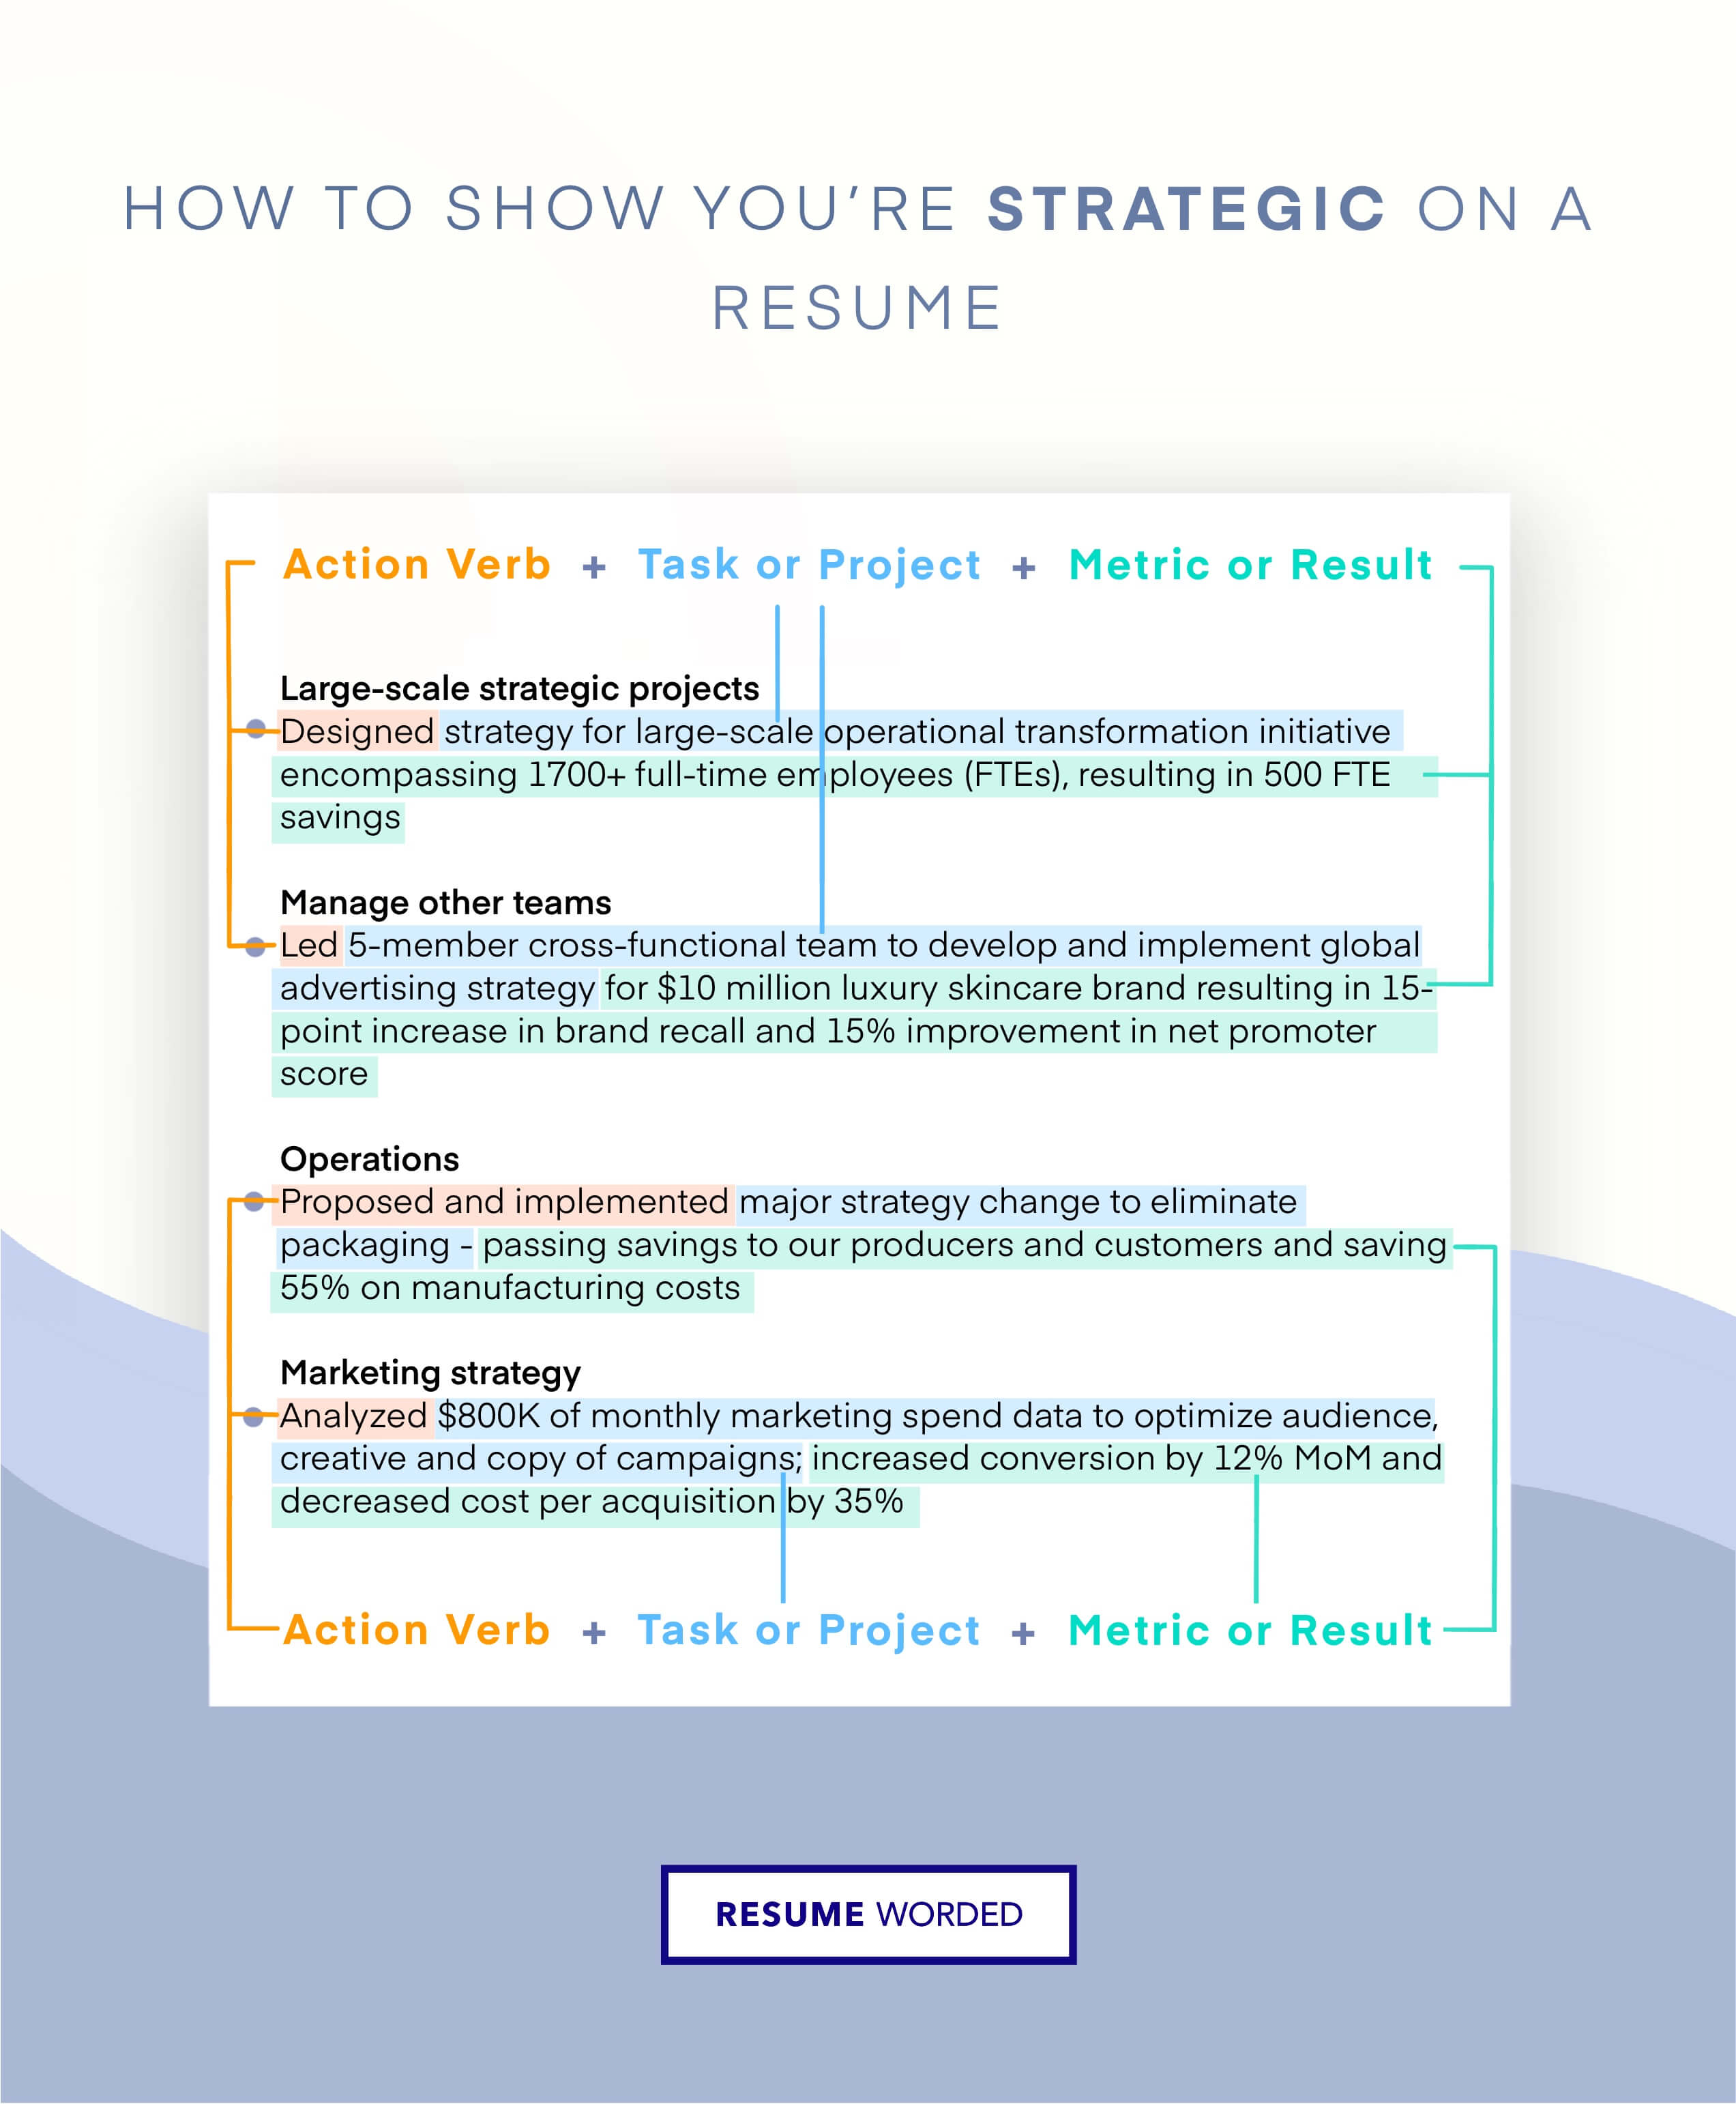 Proof of your strategic capabilities - VP of Human Resources (VP HR) CV